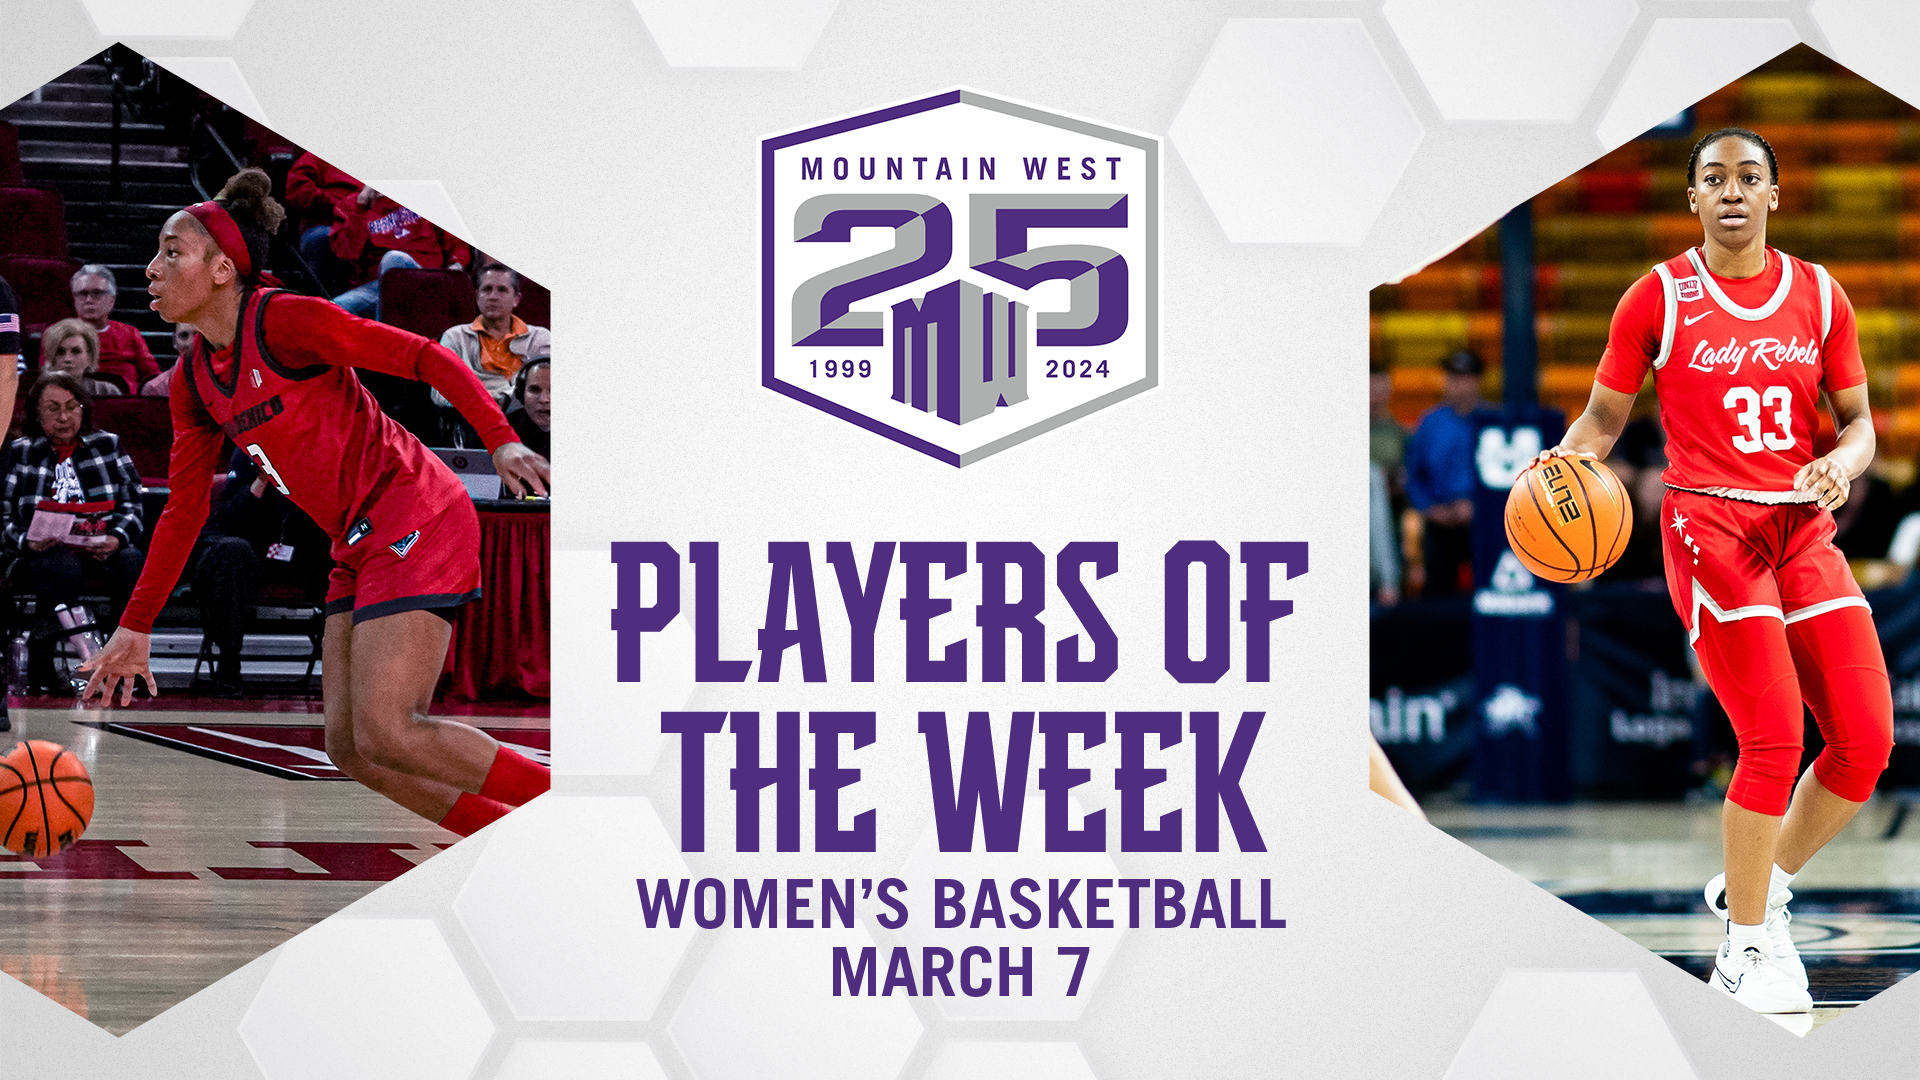 MW Women's Basketball Players of the Week - March 7